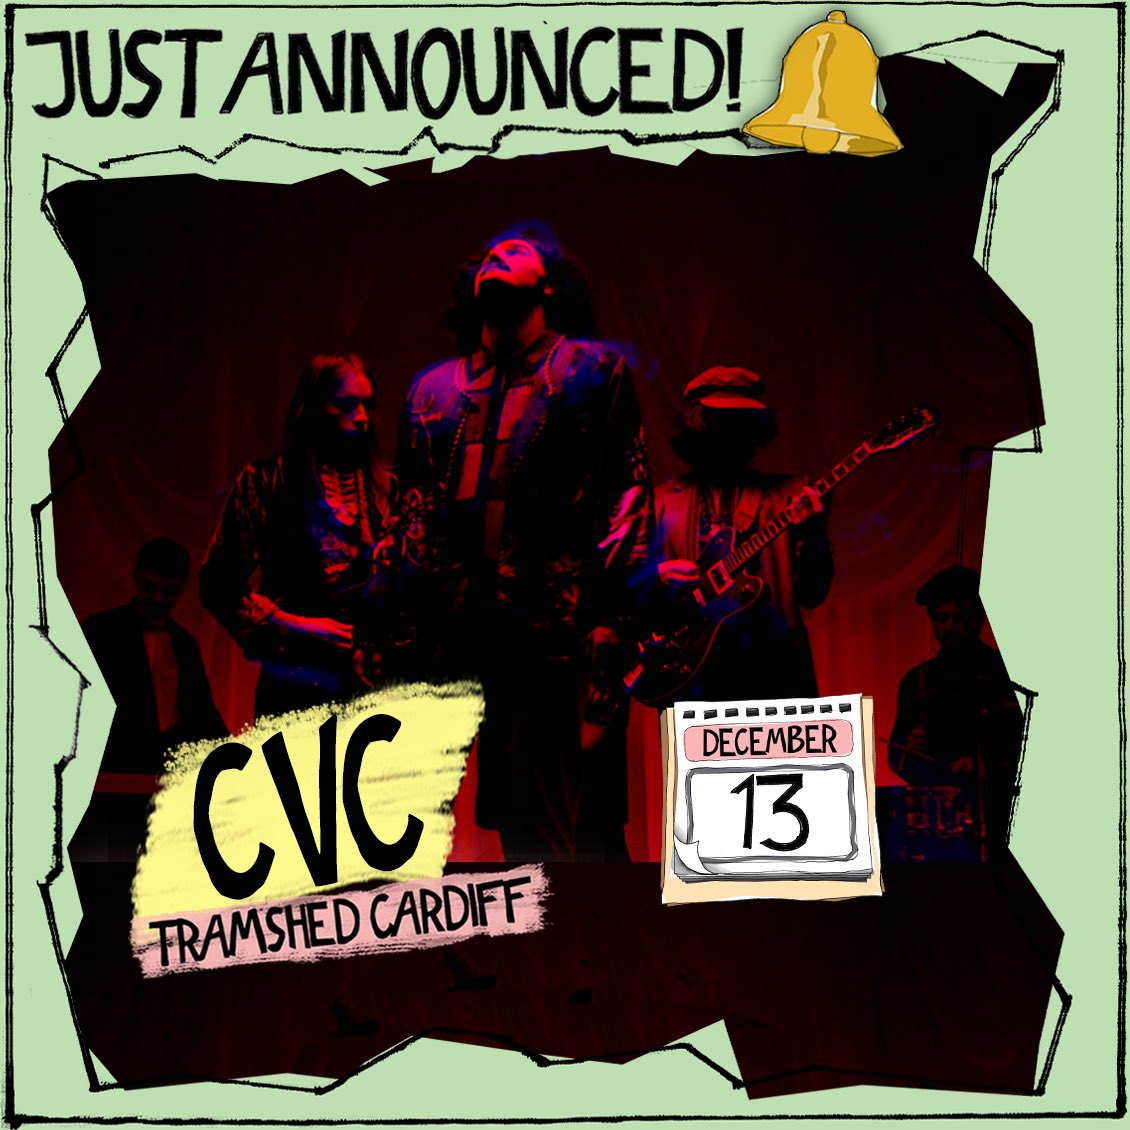 🔔👉 SLAMMIN’ GIG JUST ANNOUNCED!!! 👈🔔 arguably cooler than cool - @welshmusicprize nominees @CVCband_ are set to play their BIGGEST show in the capital where they’ve been making it happen since the beginning 🔥❤️🏴󠁧󠁢󠁷󠁬󠁳󠁿 expect some juicy support for this and a night you’re not…